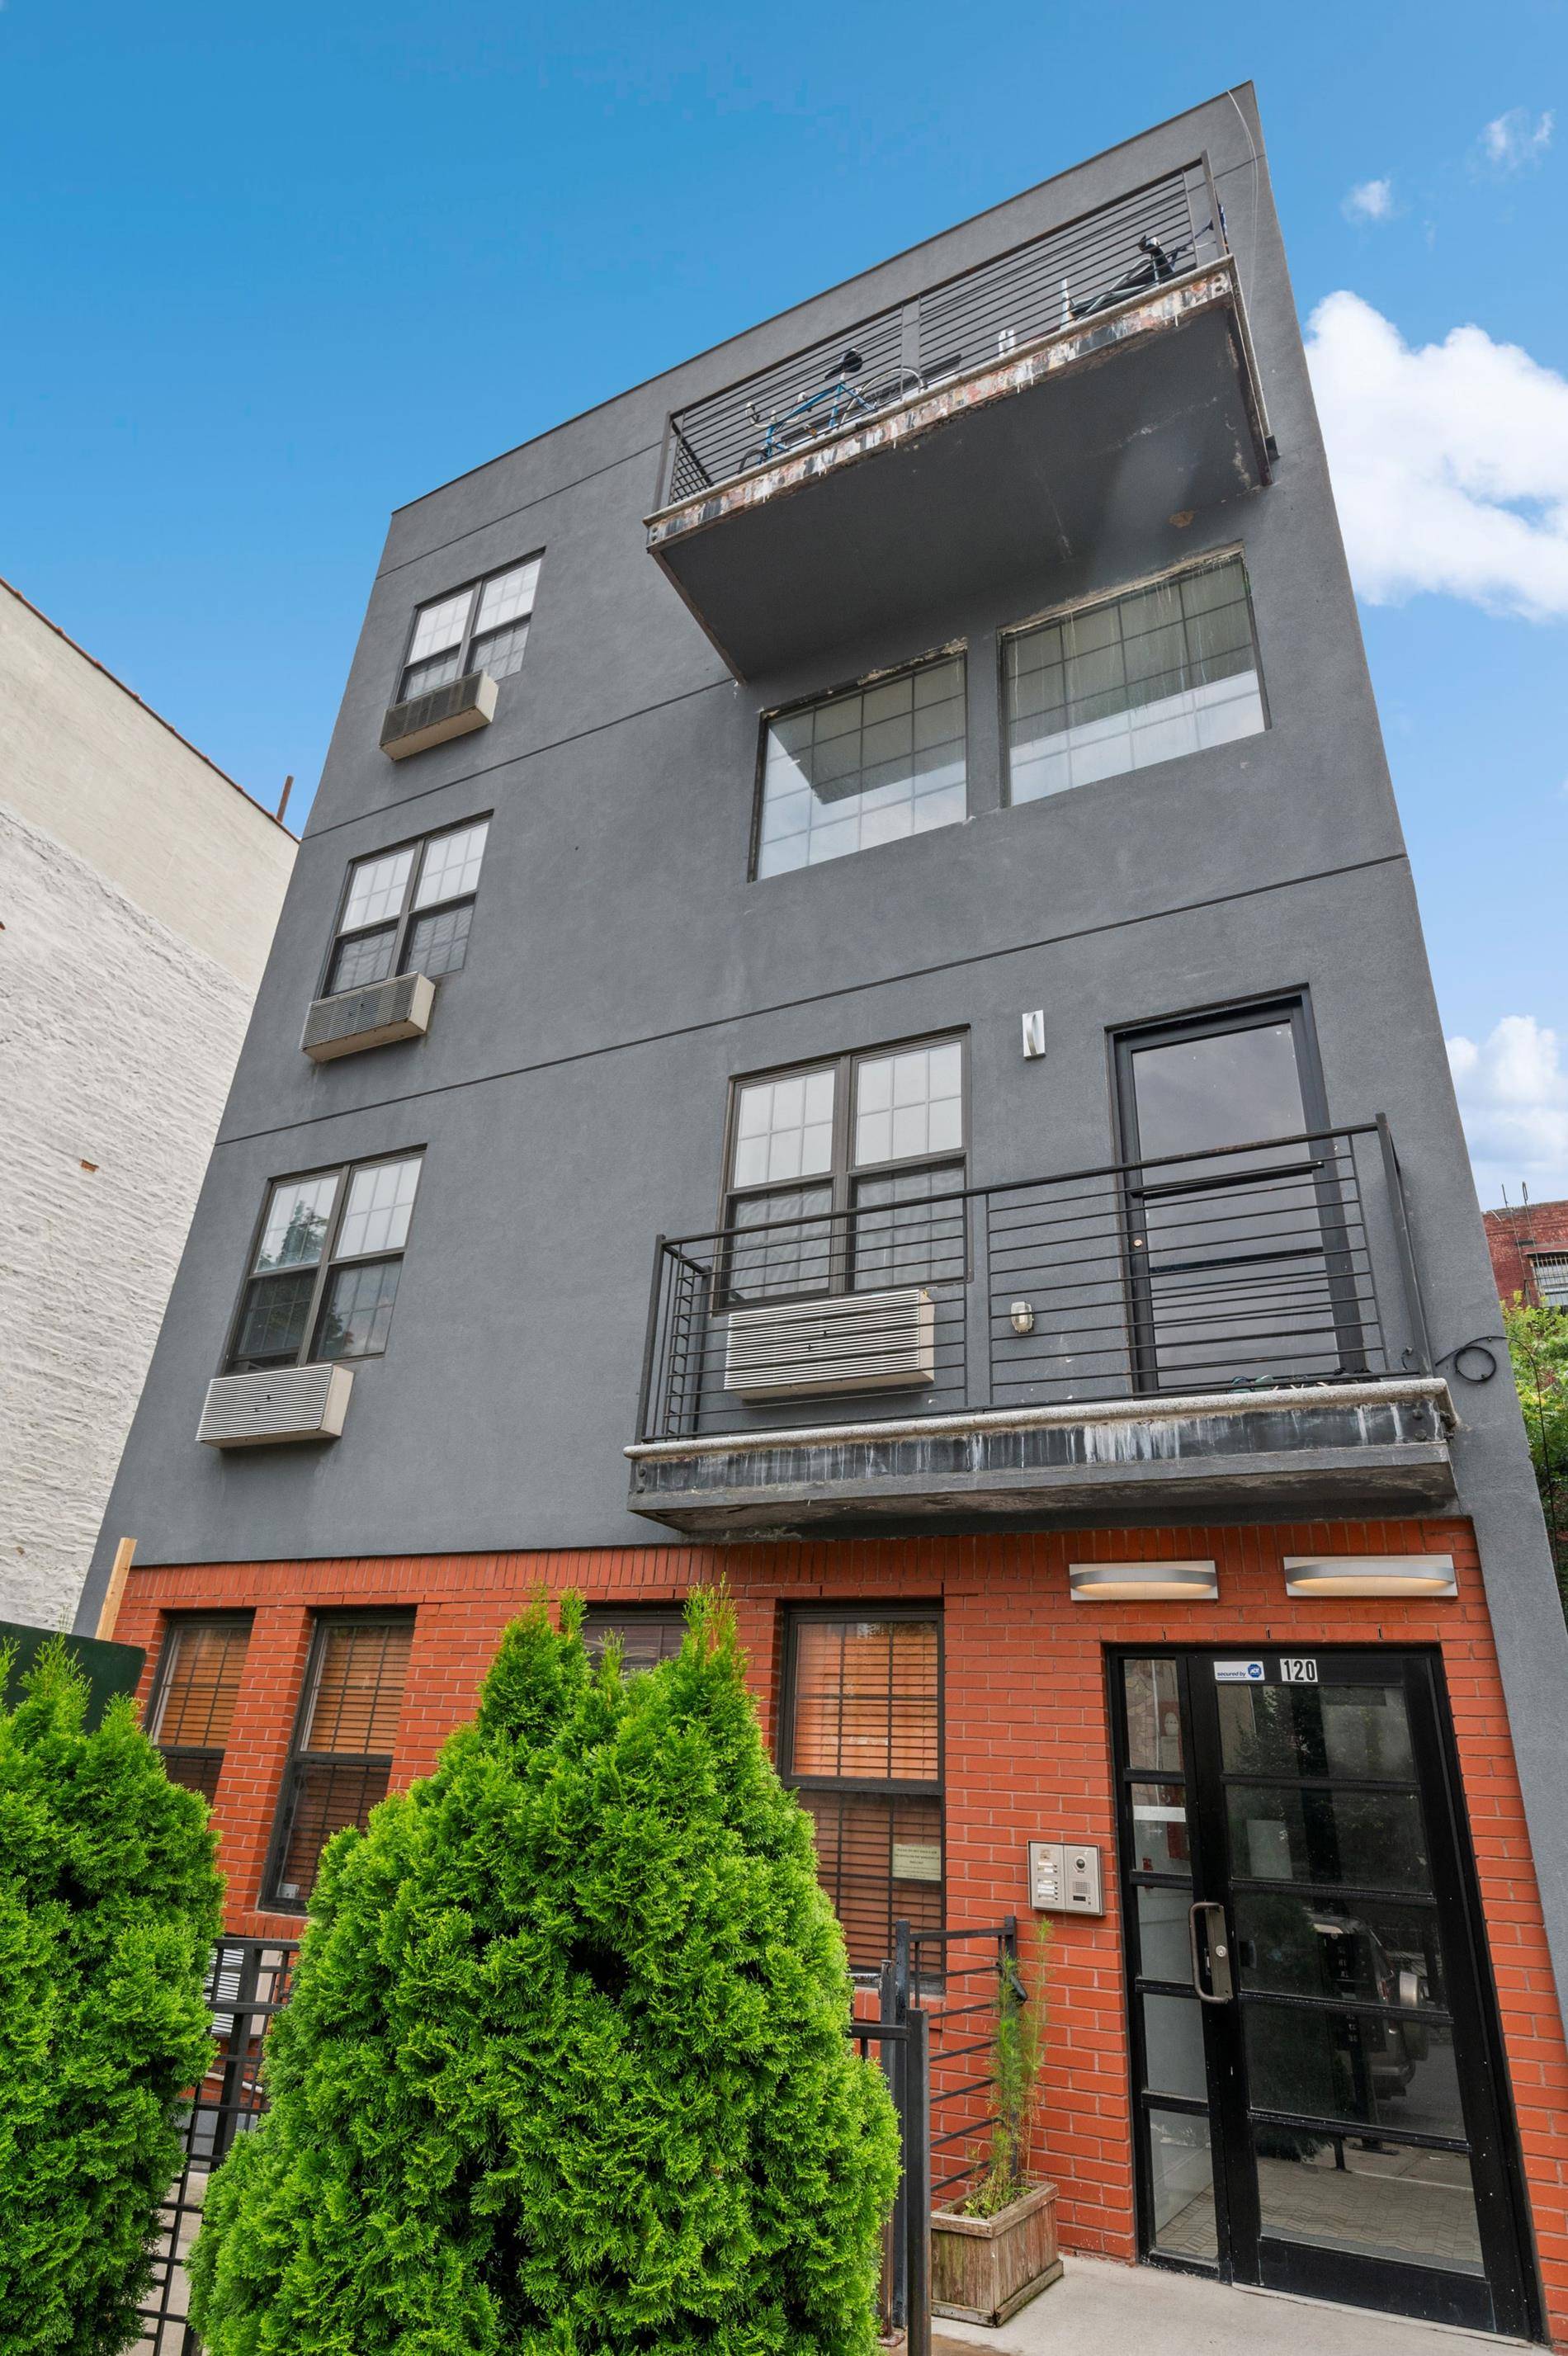 Welcome to 120 Pulaski Street, built in 2015 and consisting of 6 newly designed and developed condominium units, in the heart of Bedford Stuyvesant.